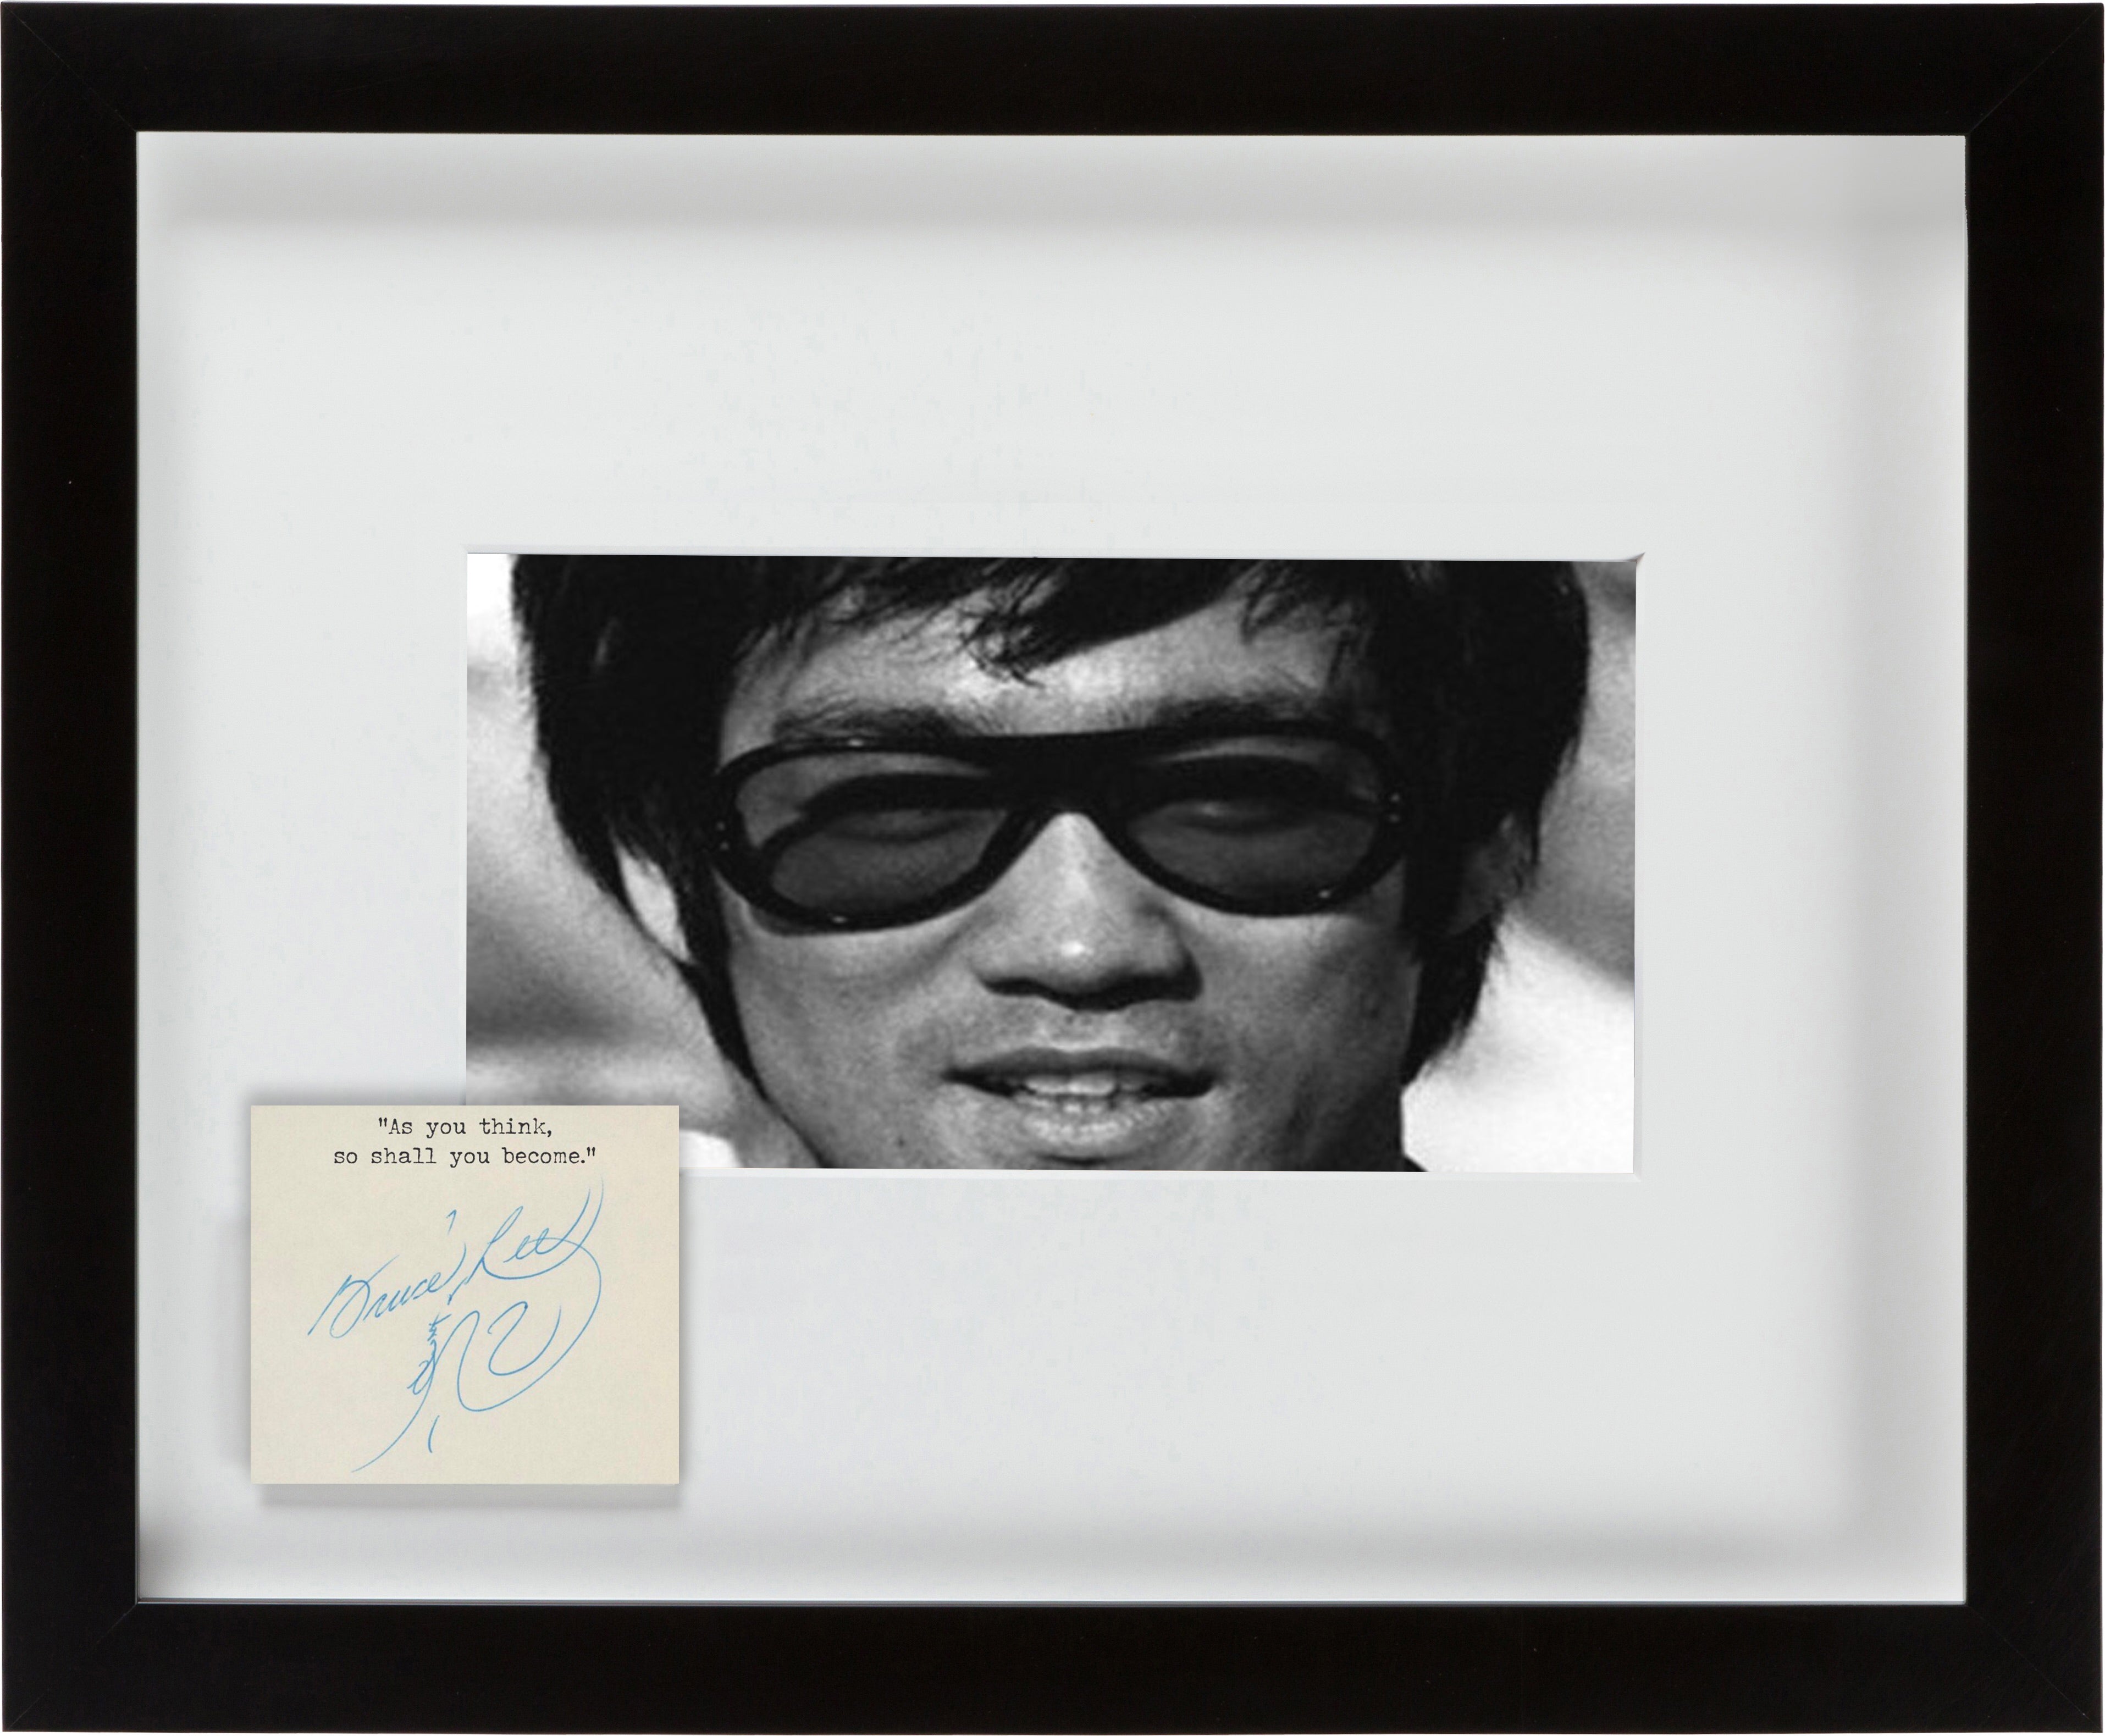 Rare Bruce Lee Signed Quote “As you think, so shall you become.”